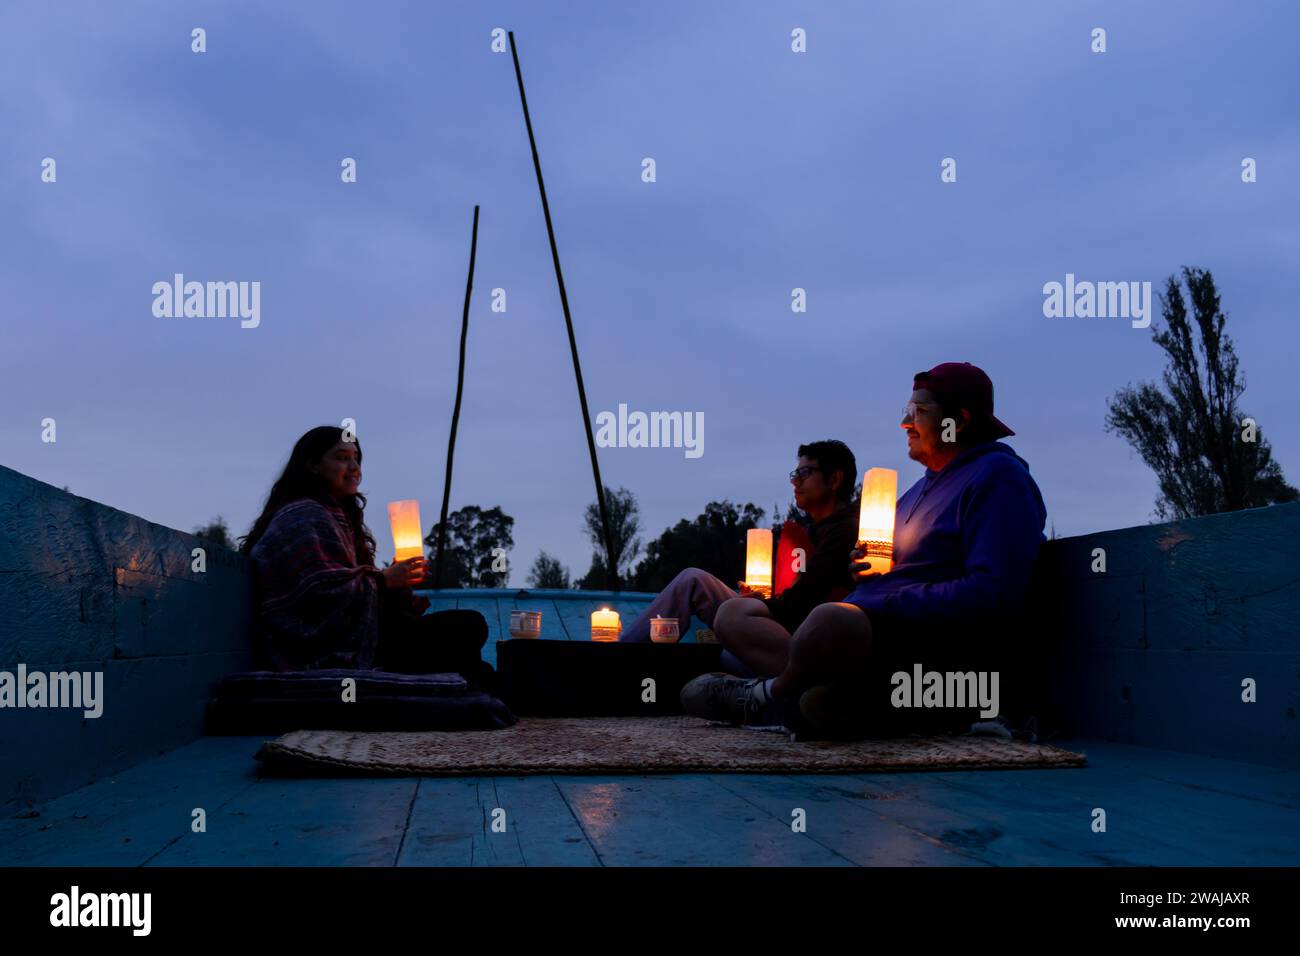 Three individuals are engaging in a serene twilight experience in Xochimilco Mexico City surrounded by lanterns that cast a soft glow Stock Photo